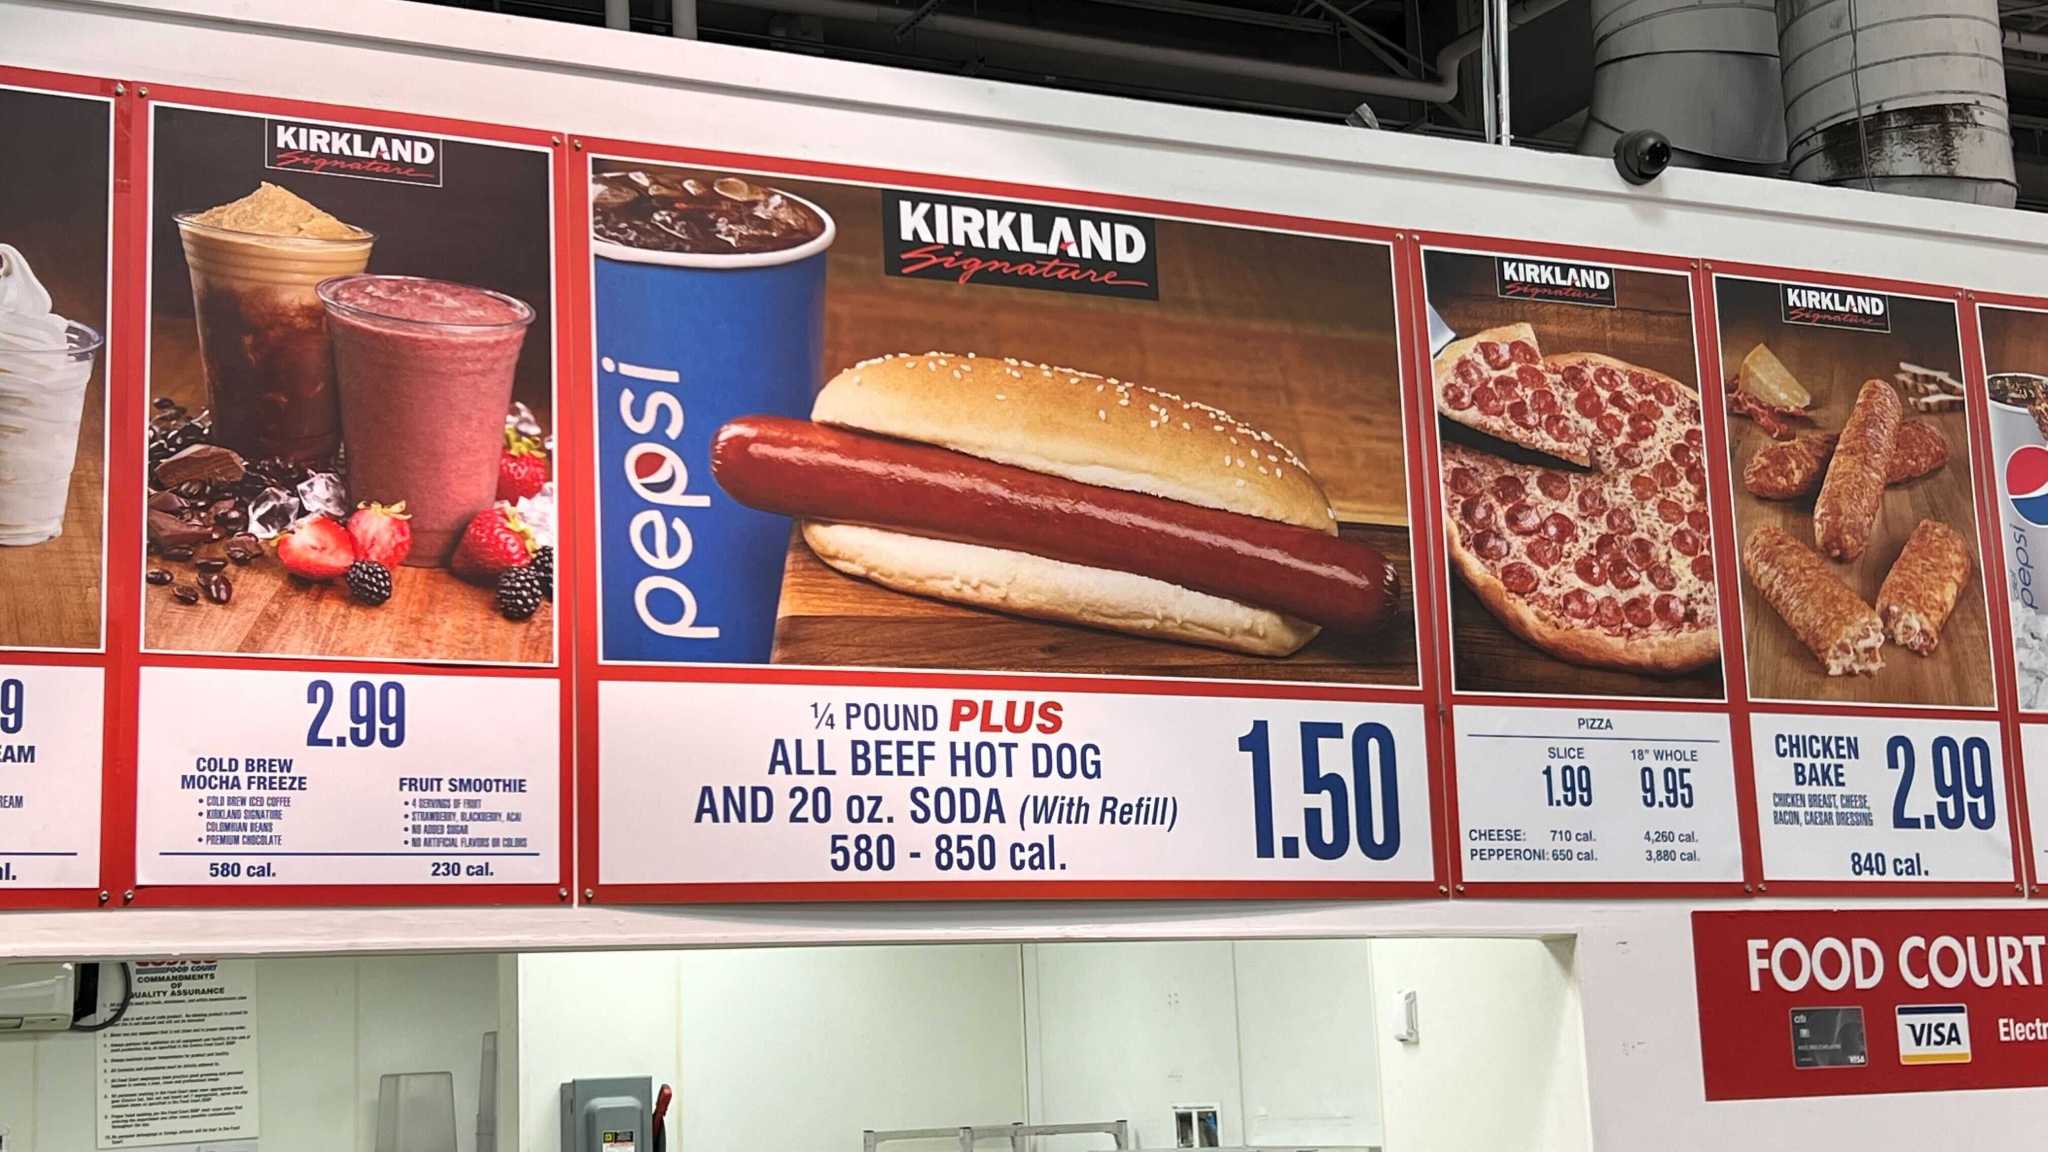 Inflation hits Costco food court with price increases on two items